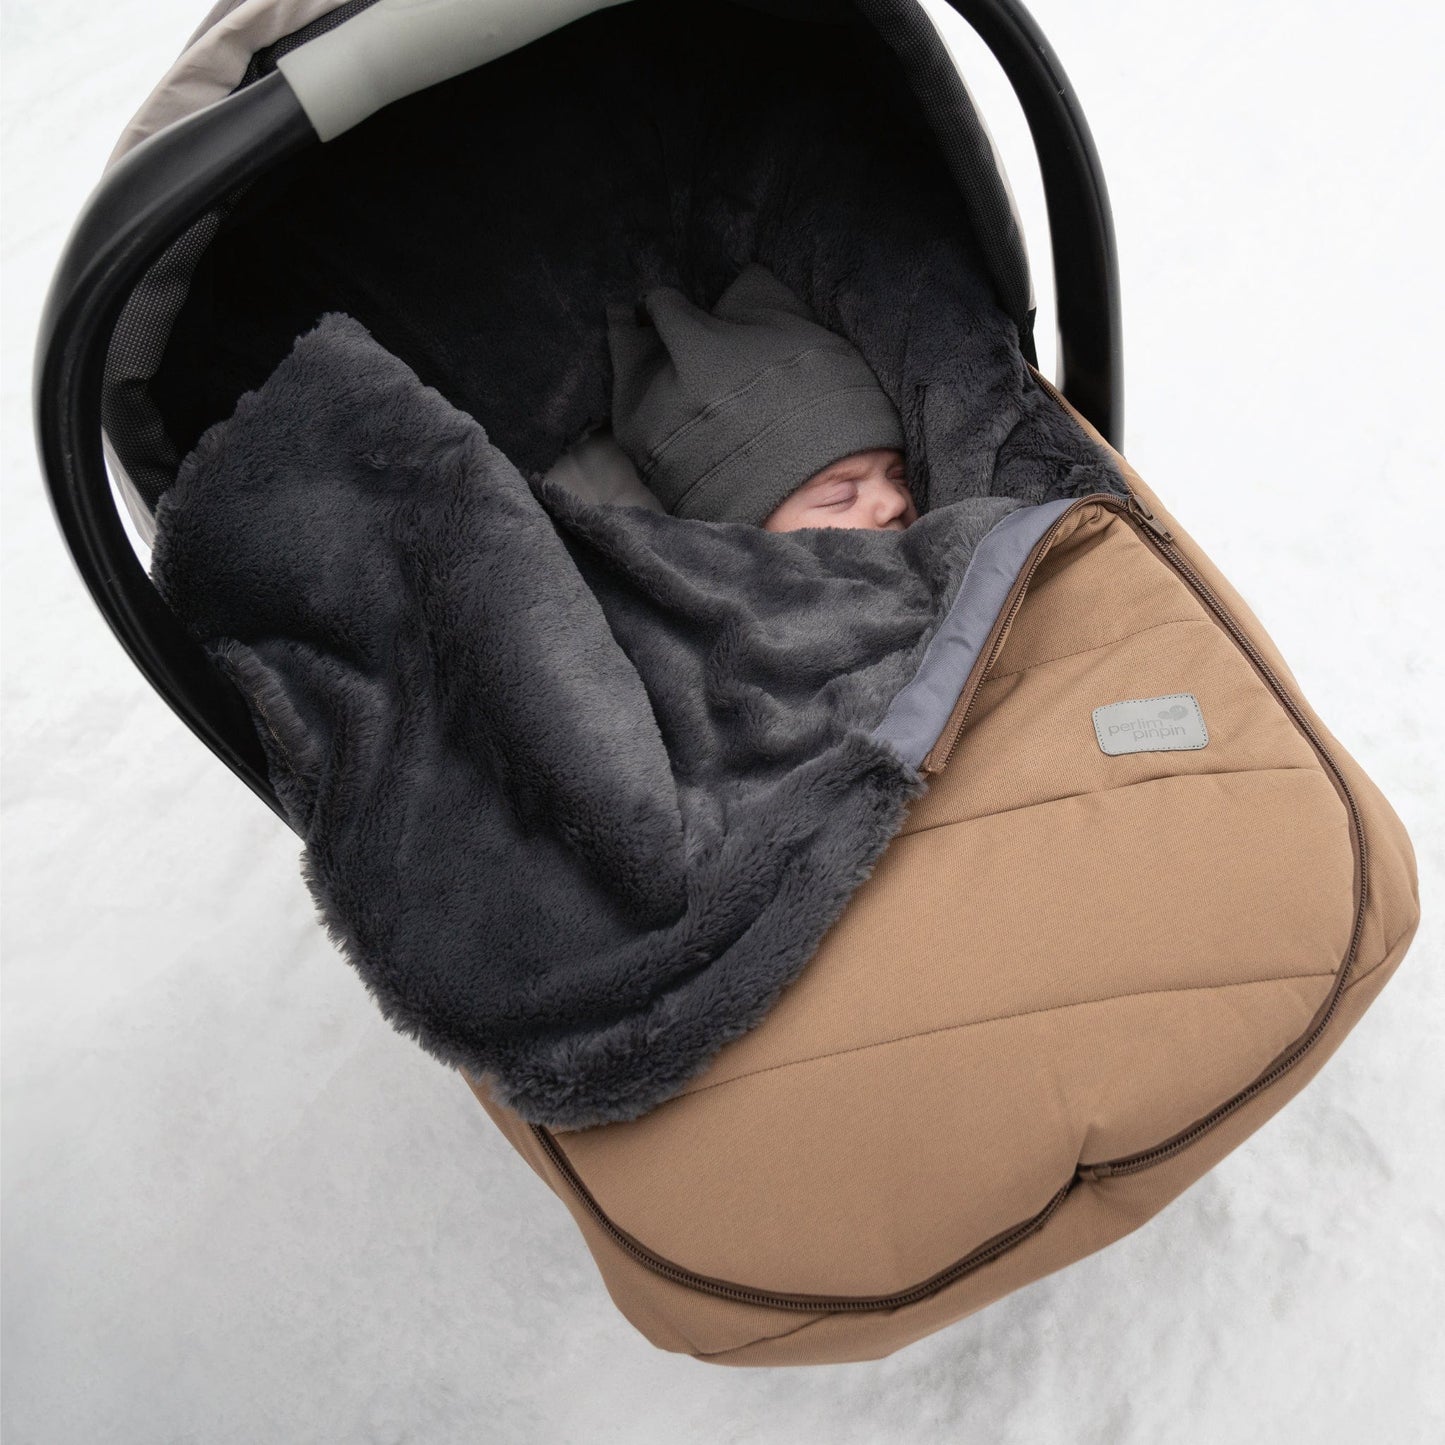 Baby car seat cover for winter - Hunter green